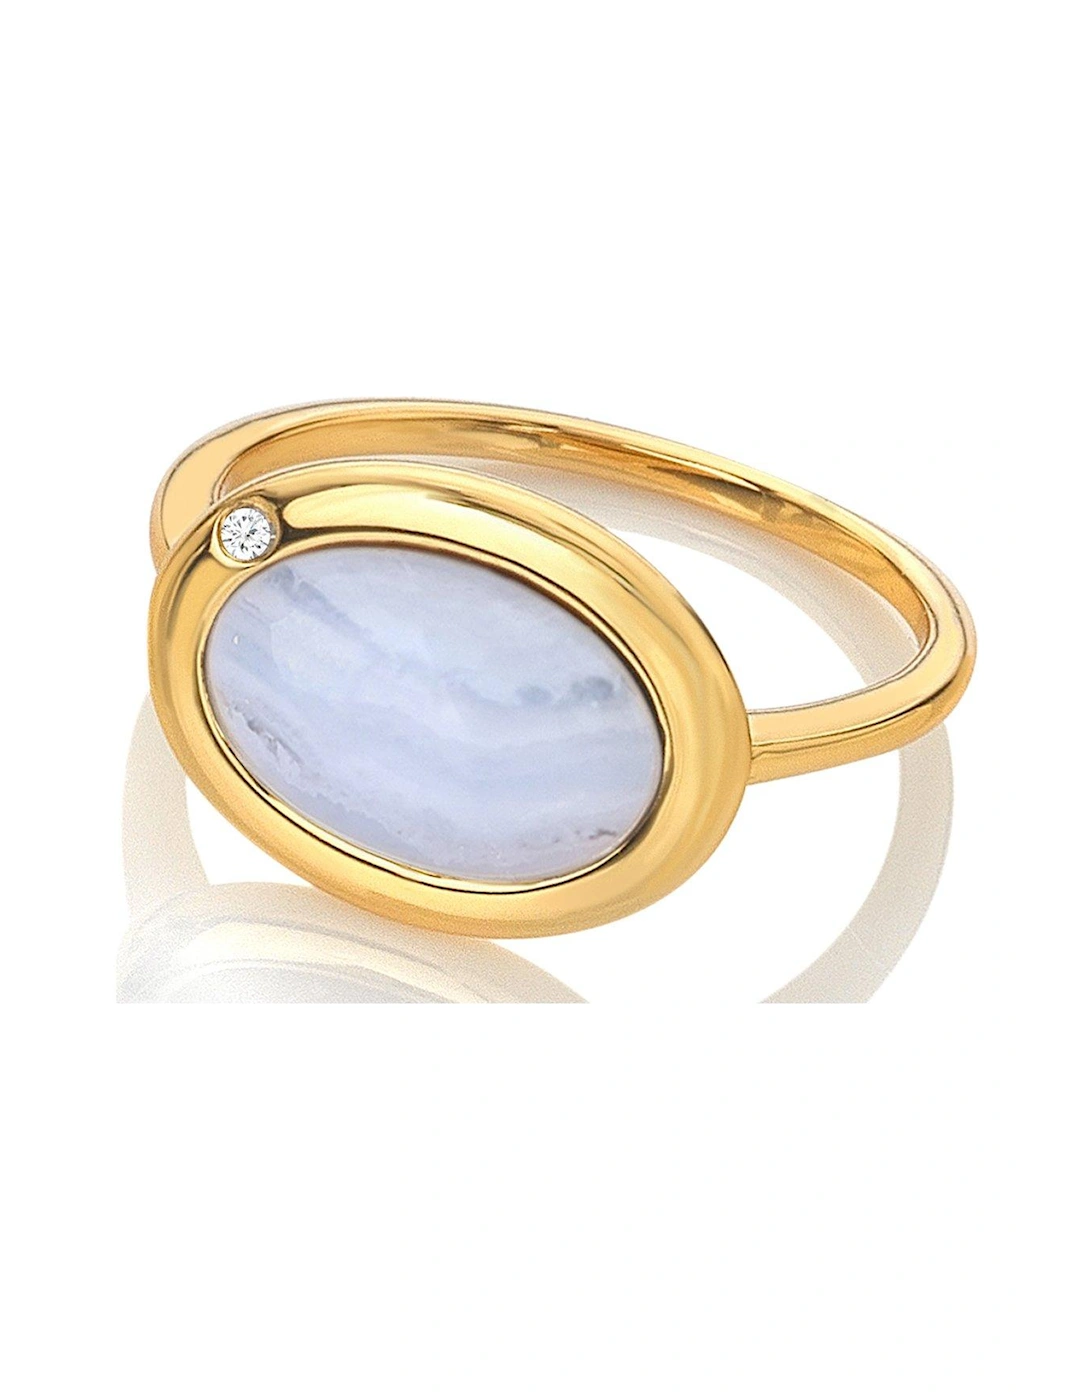 HDXGEM Horizontal Oval Ring - Blue Lace Agate